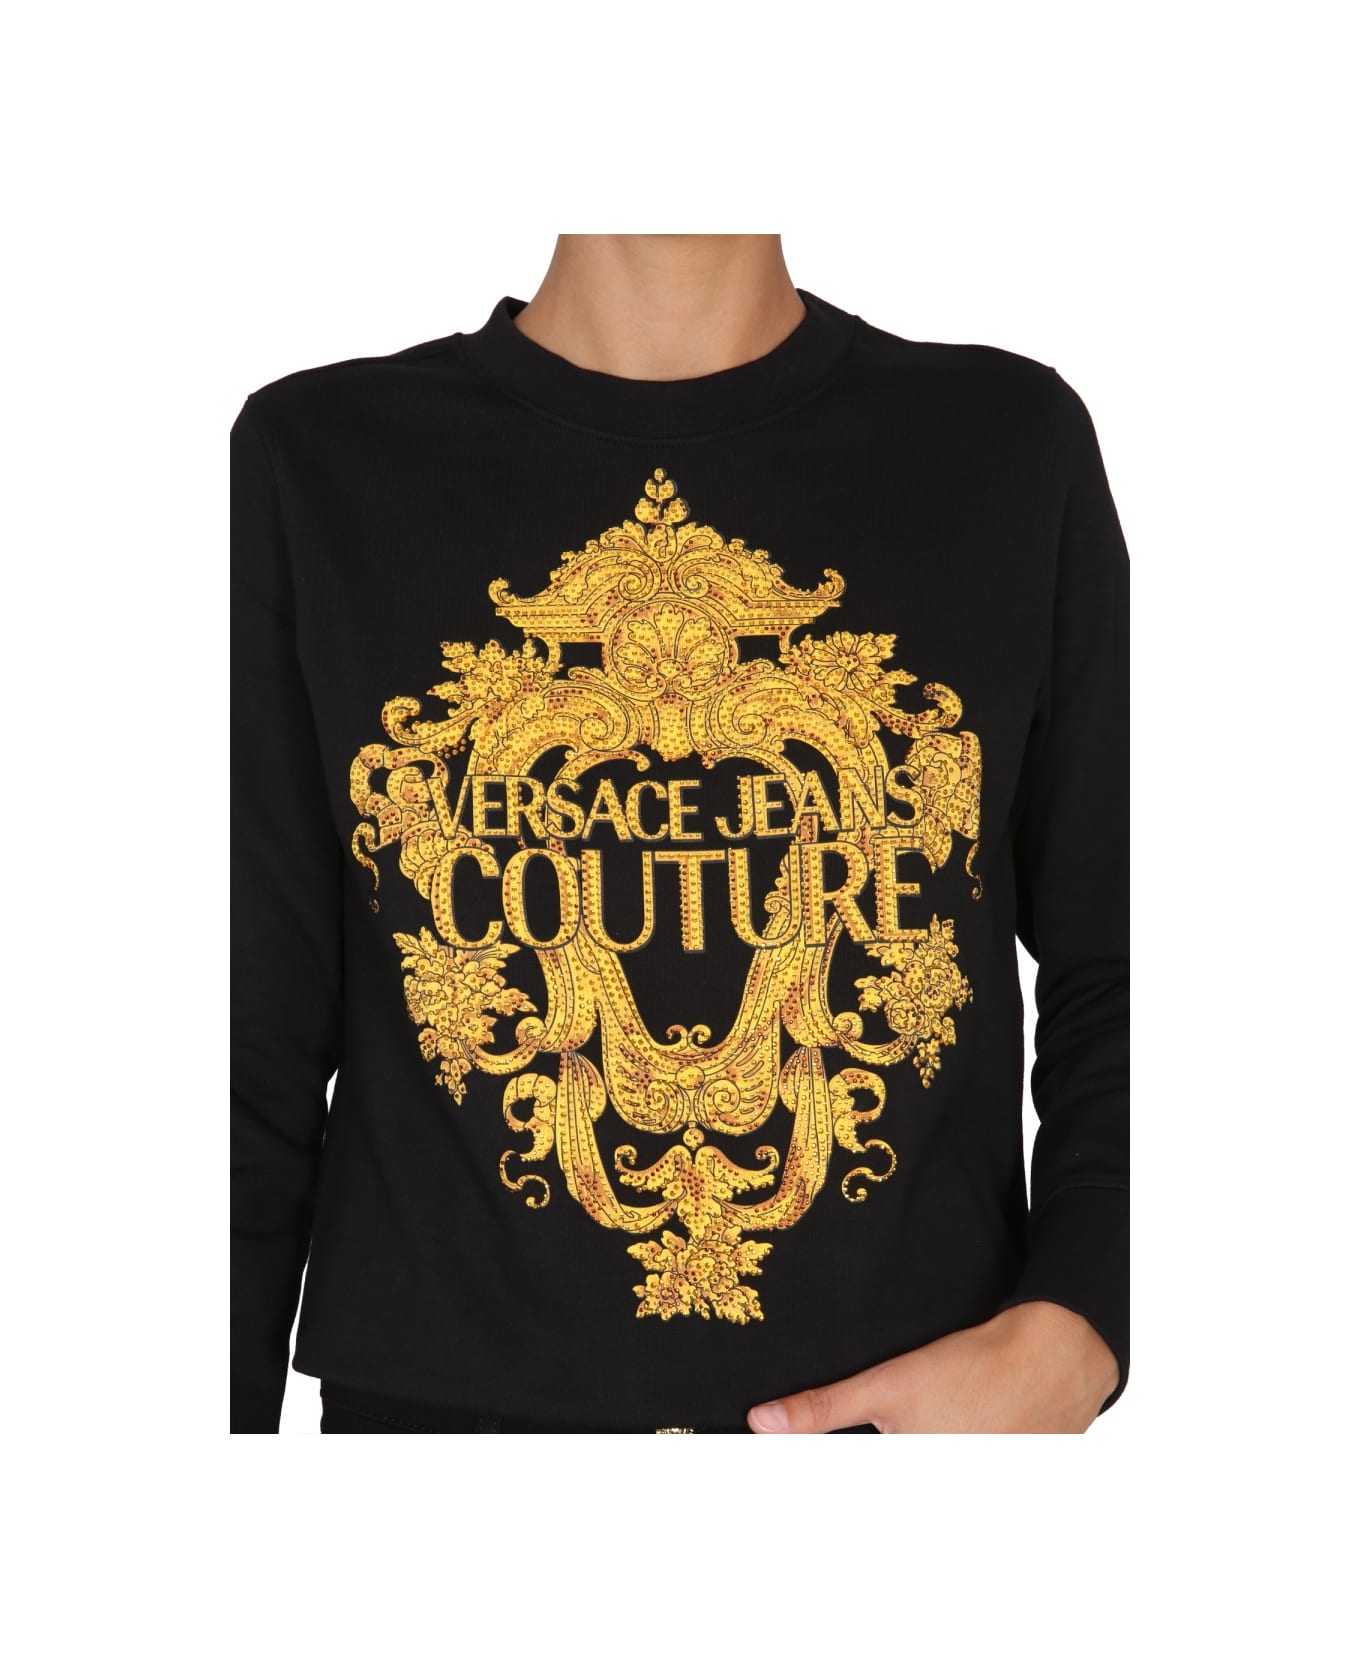 Versace Jeans Couture Sweatshirt With Baroque Print - BLACK